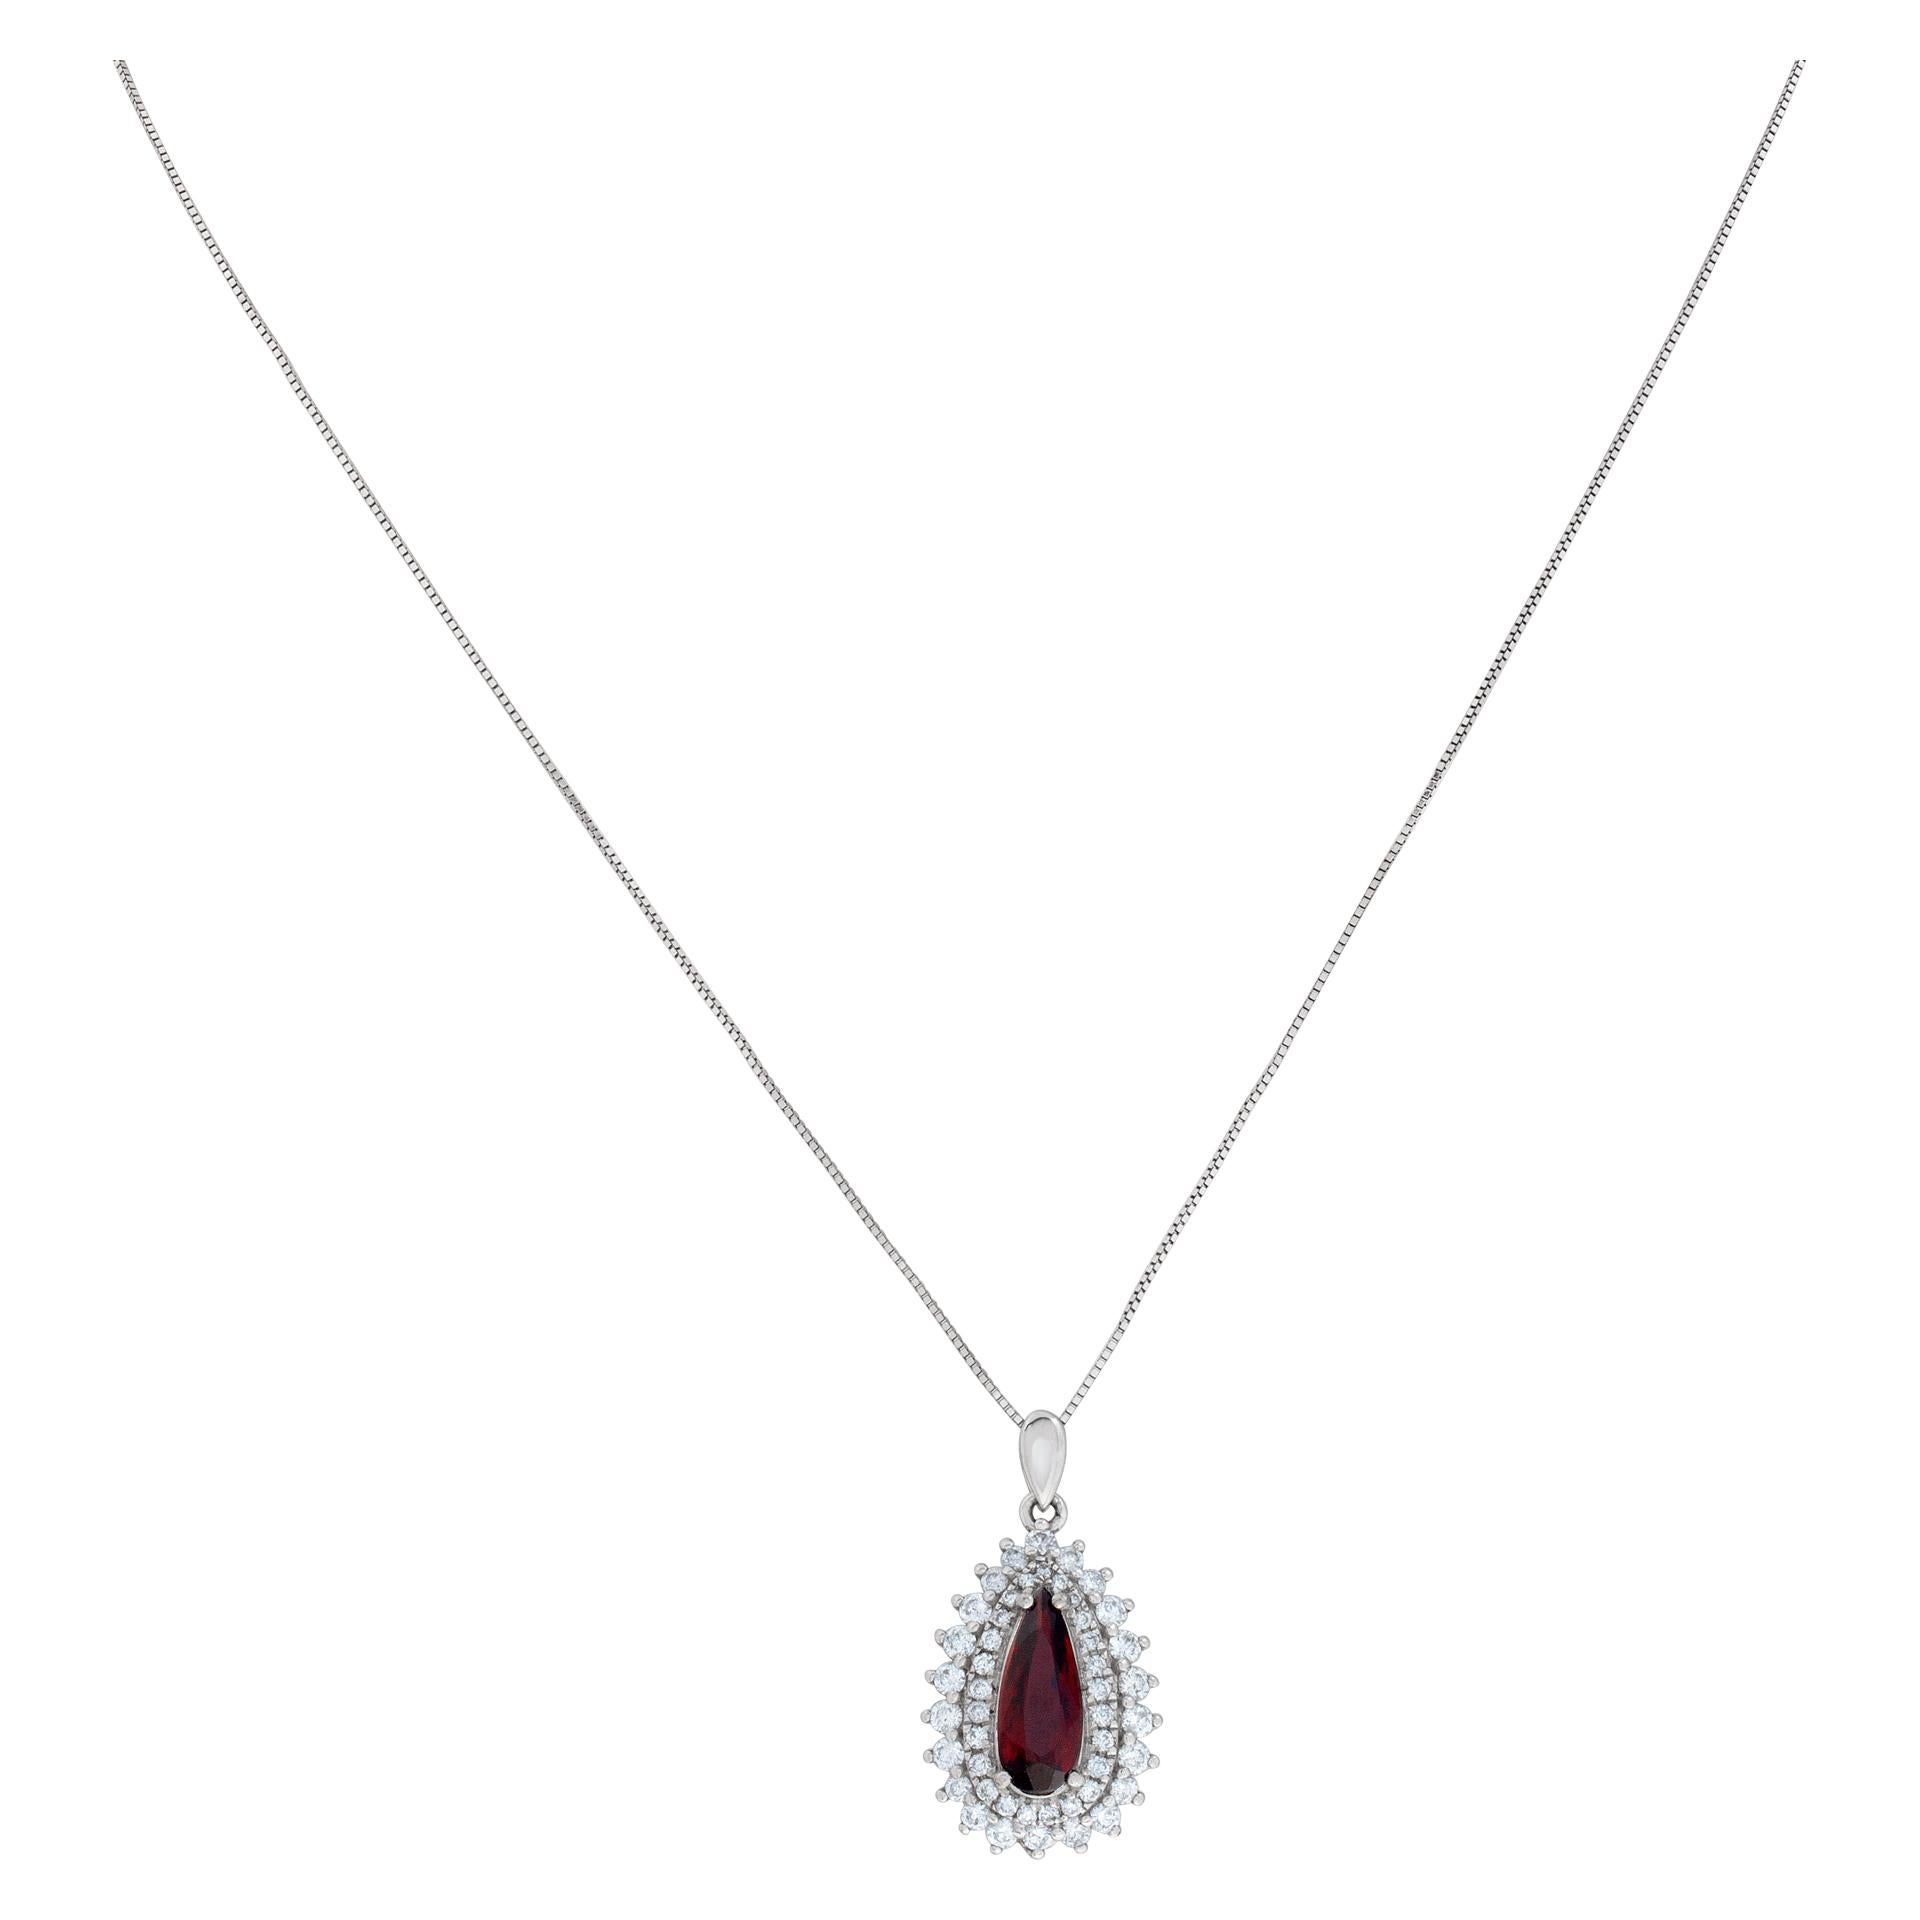 Pear shape Garnet pendant surrounded by diamonds set with approximately 0.79 carats in diamonds in 18K white gold with 16